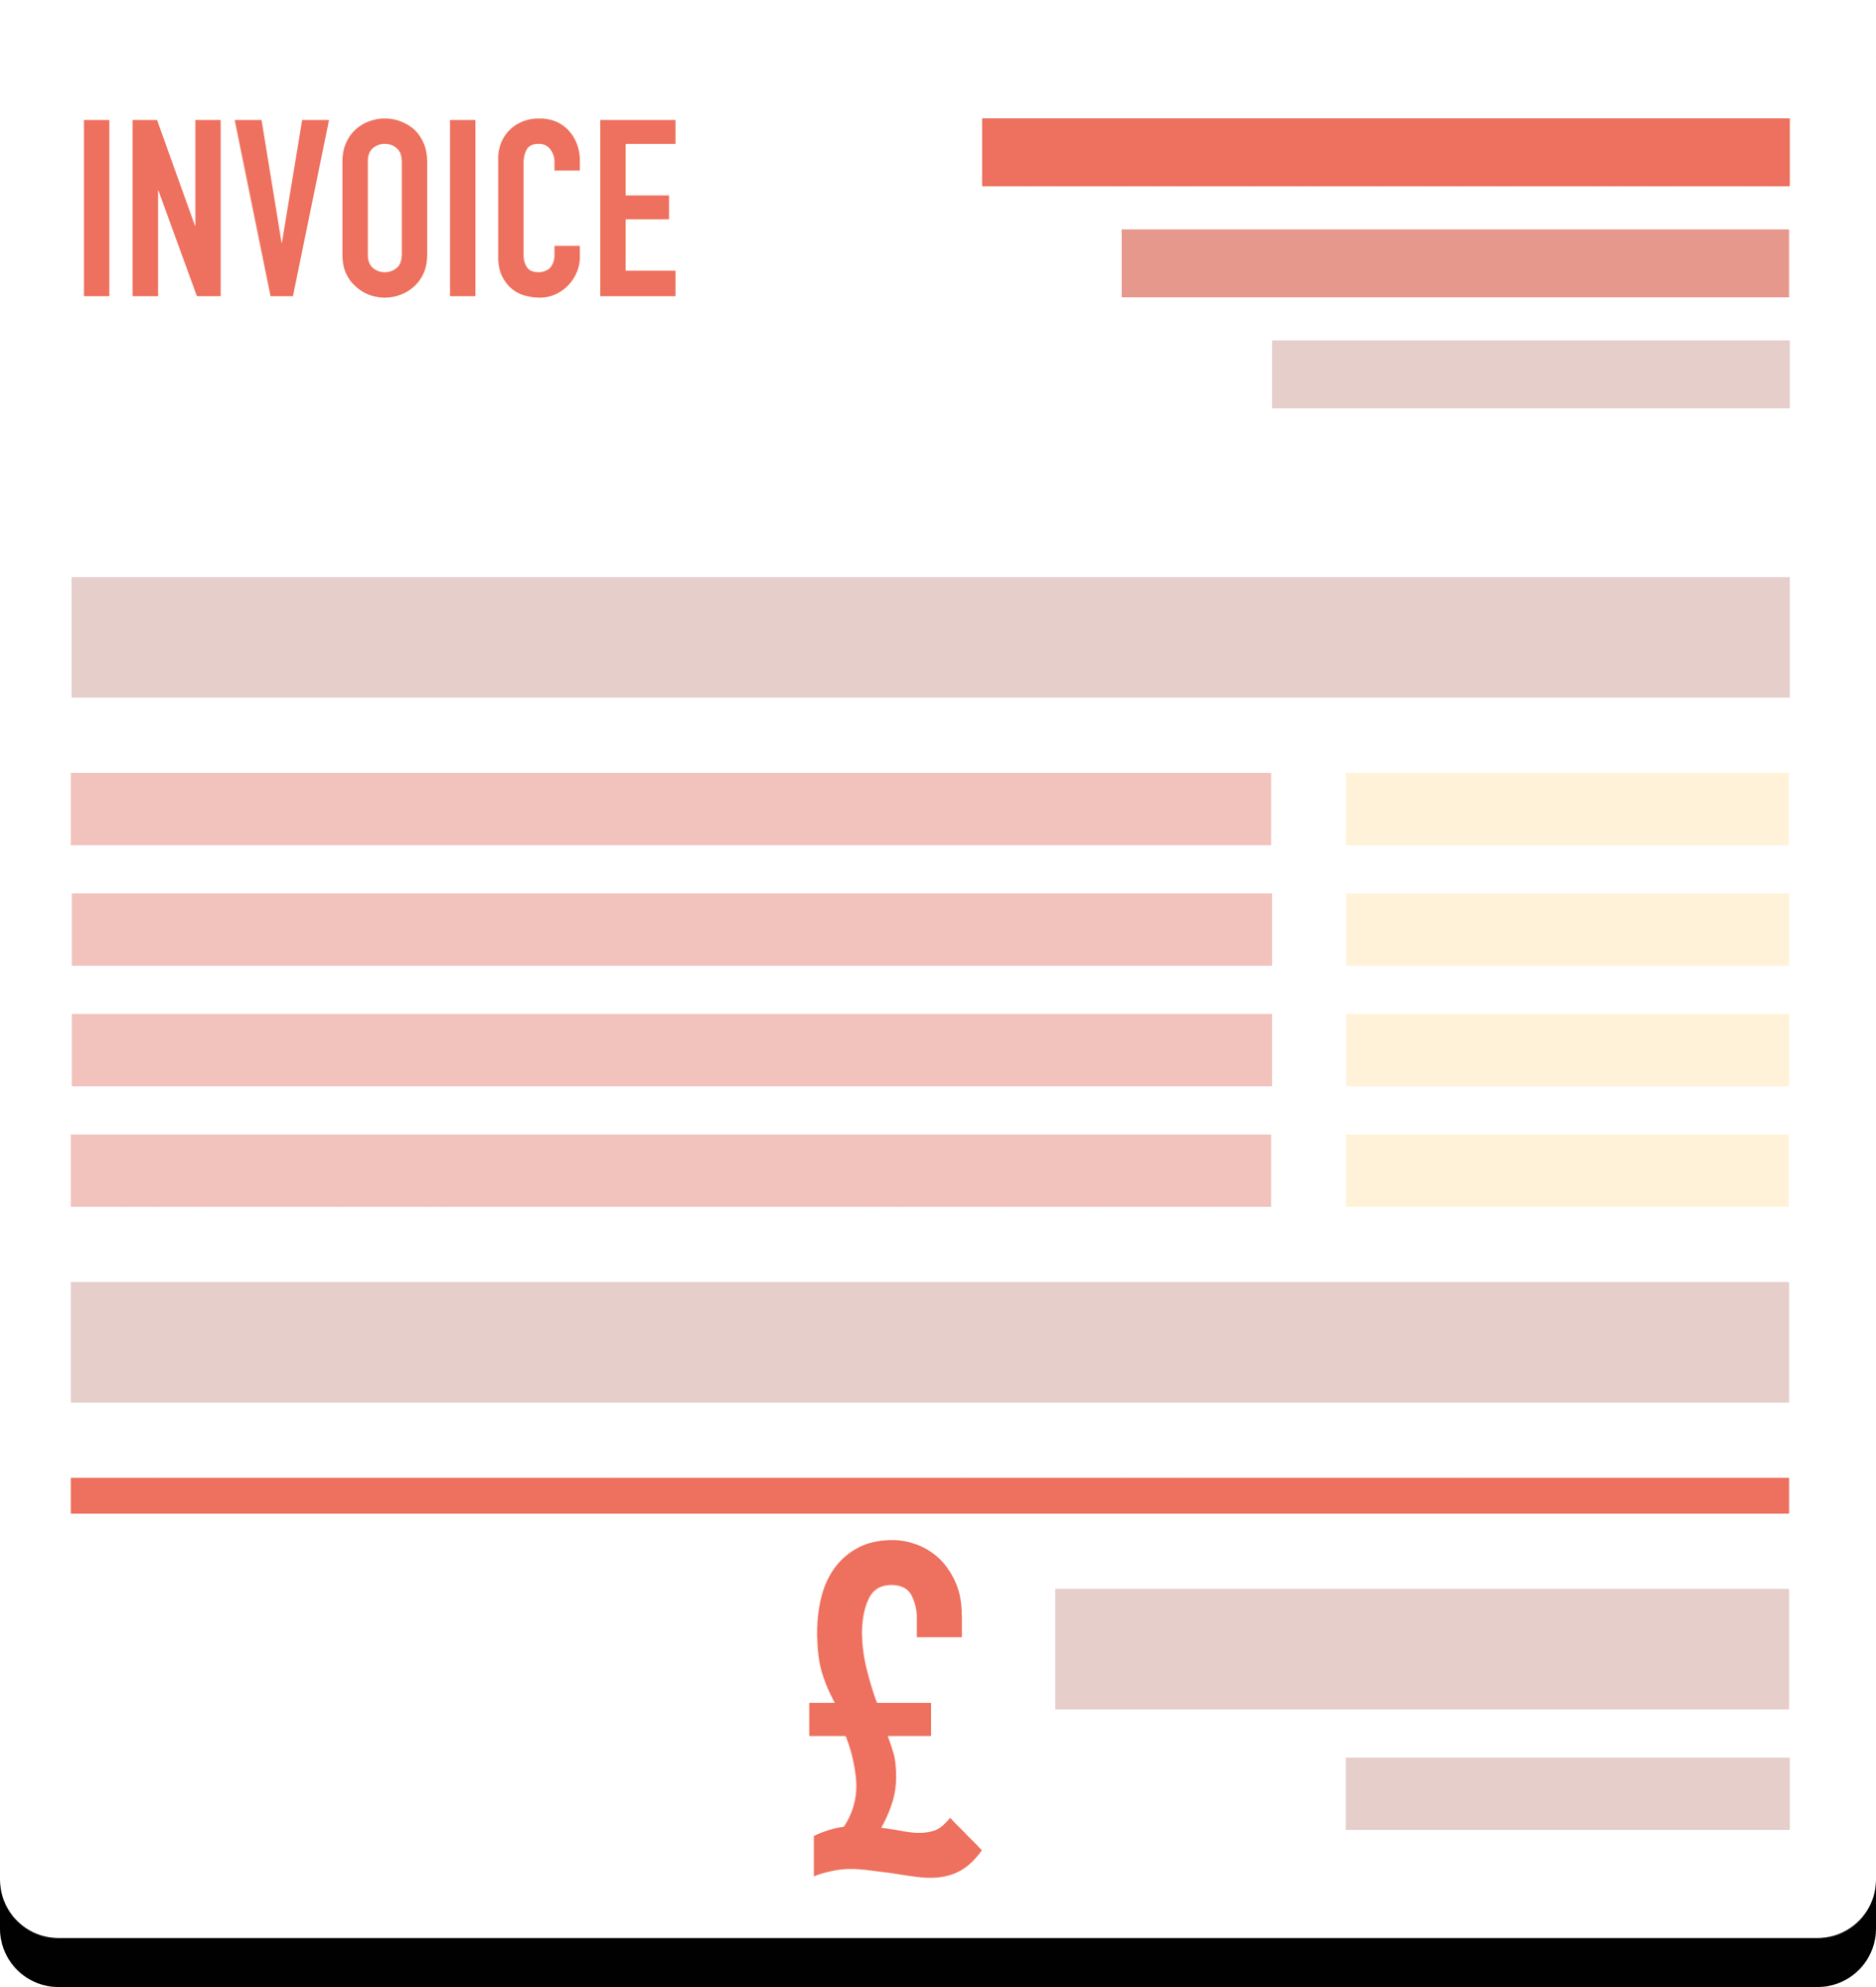 Invoice template for Painting and Decorating 